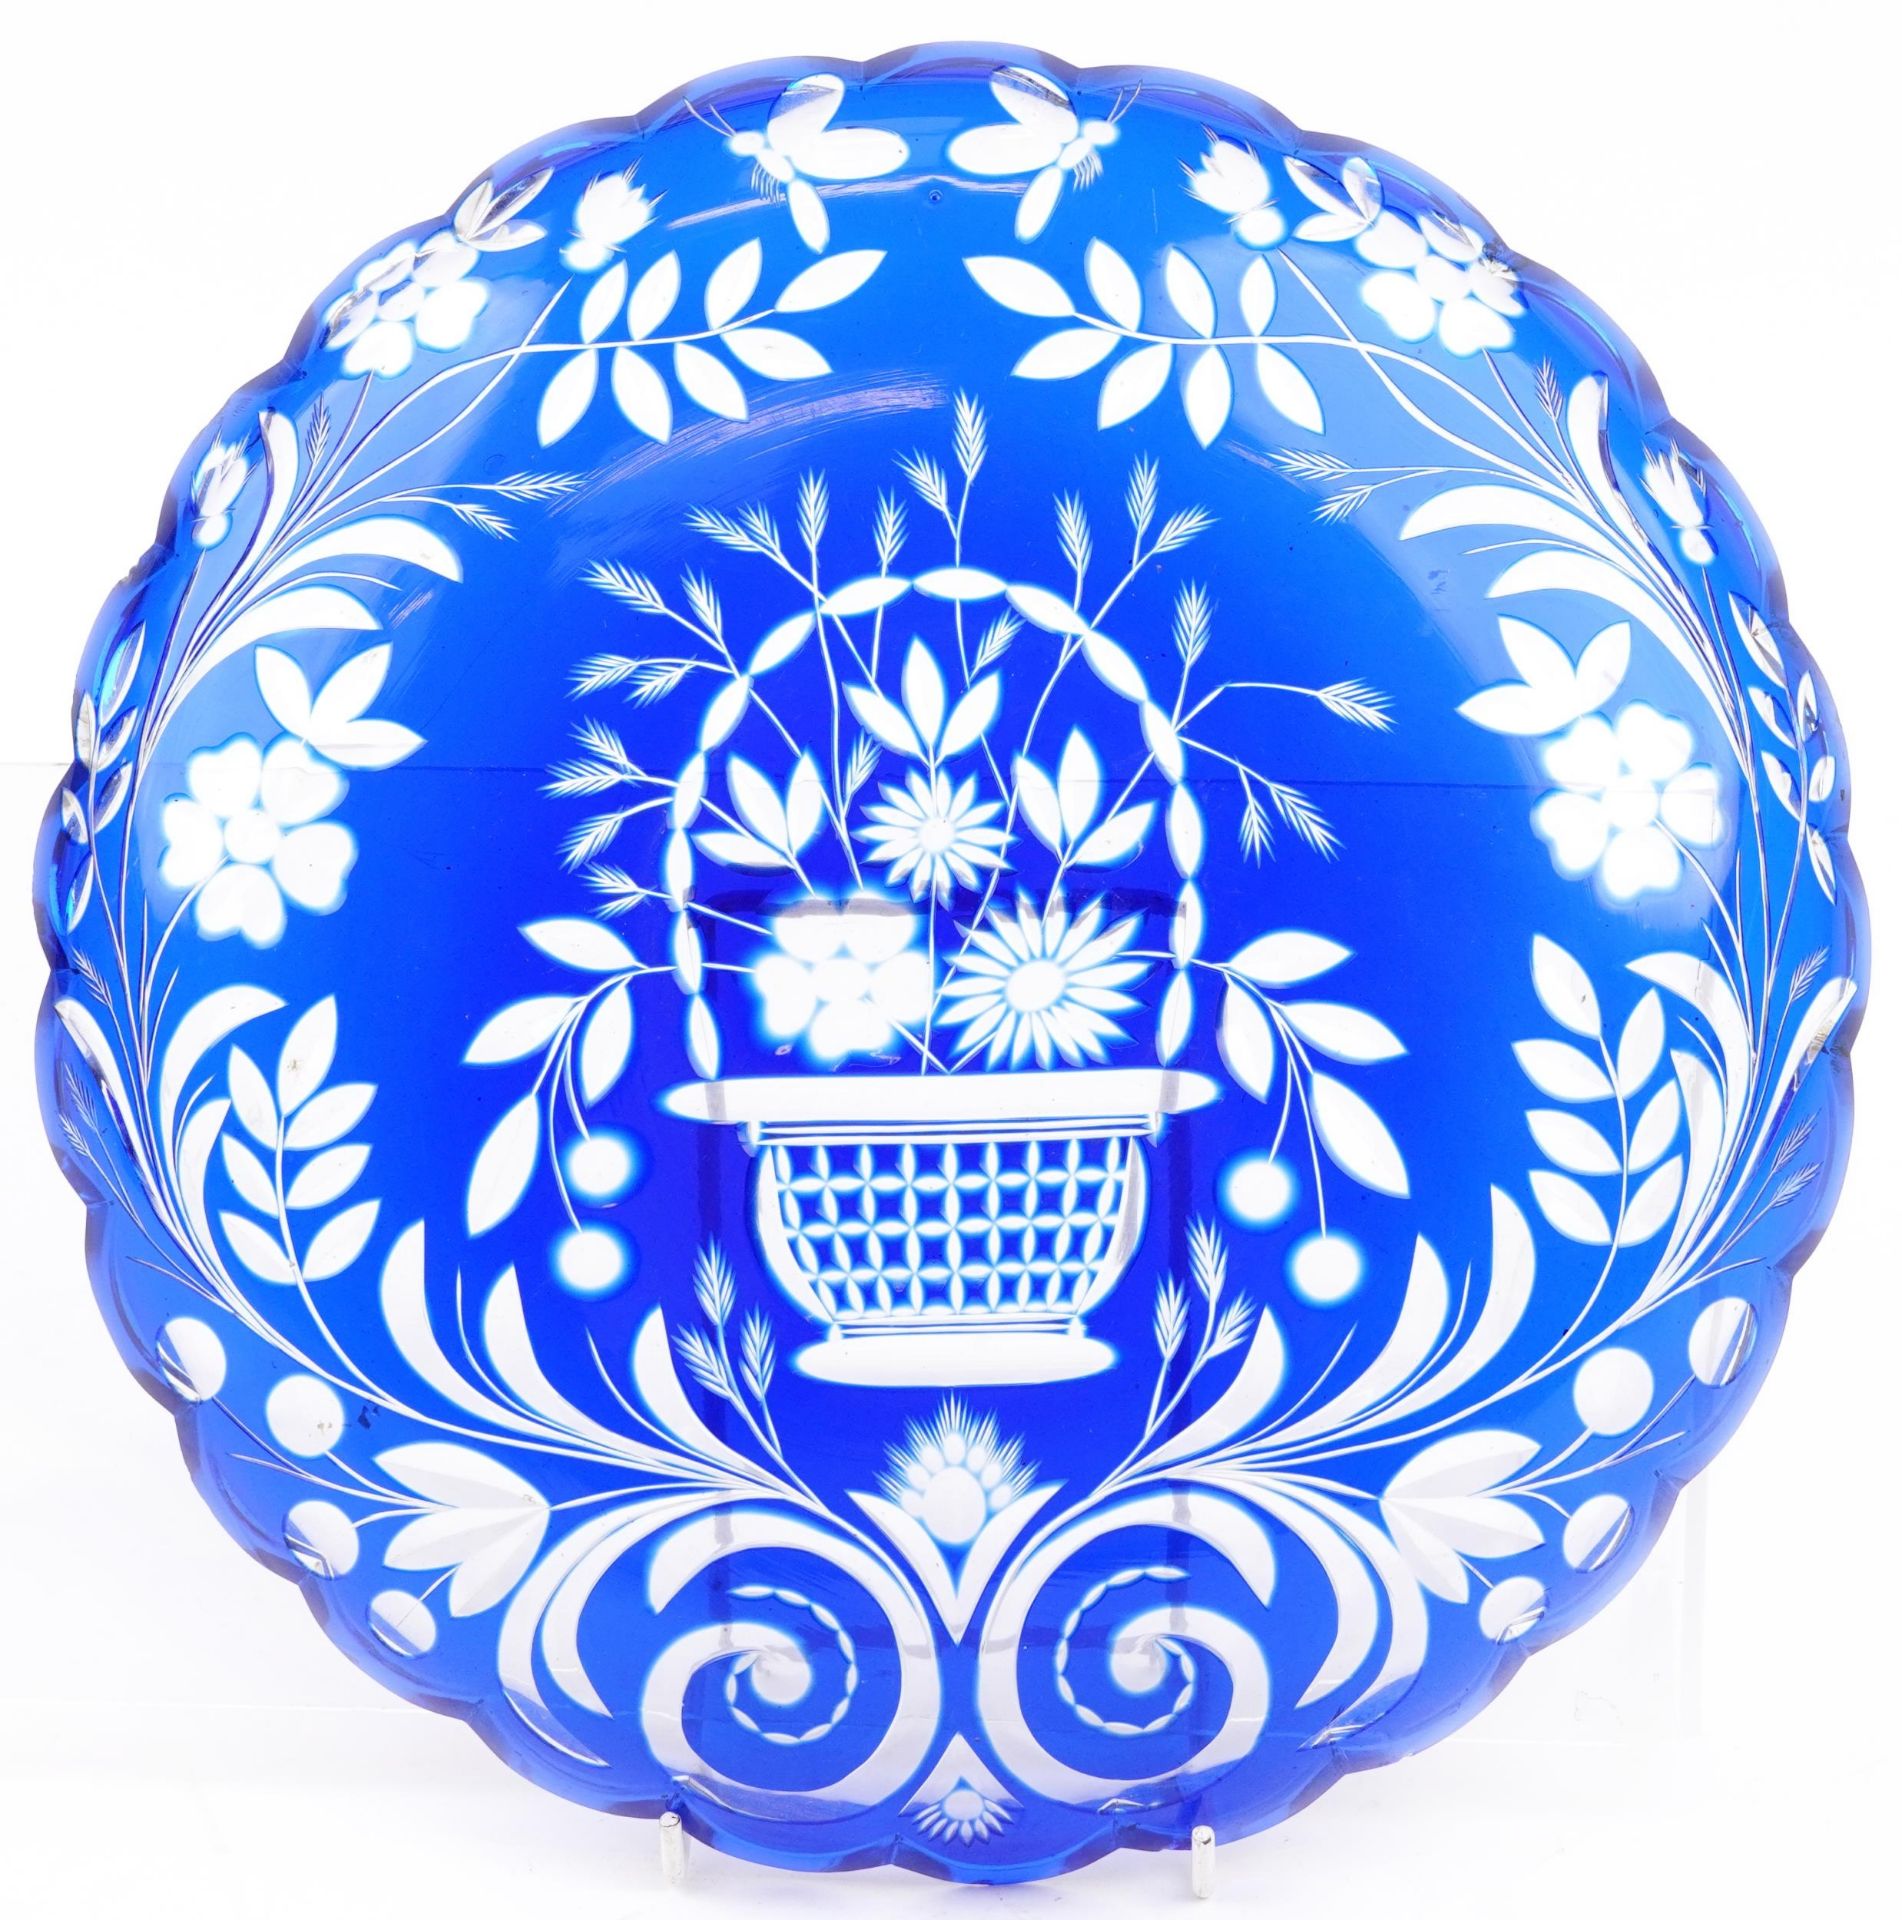 Bohemian blue flashed glass dish etched with flowers in a basket, 28cm in diameter : For further - Image 2 of 2